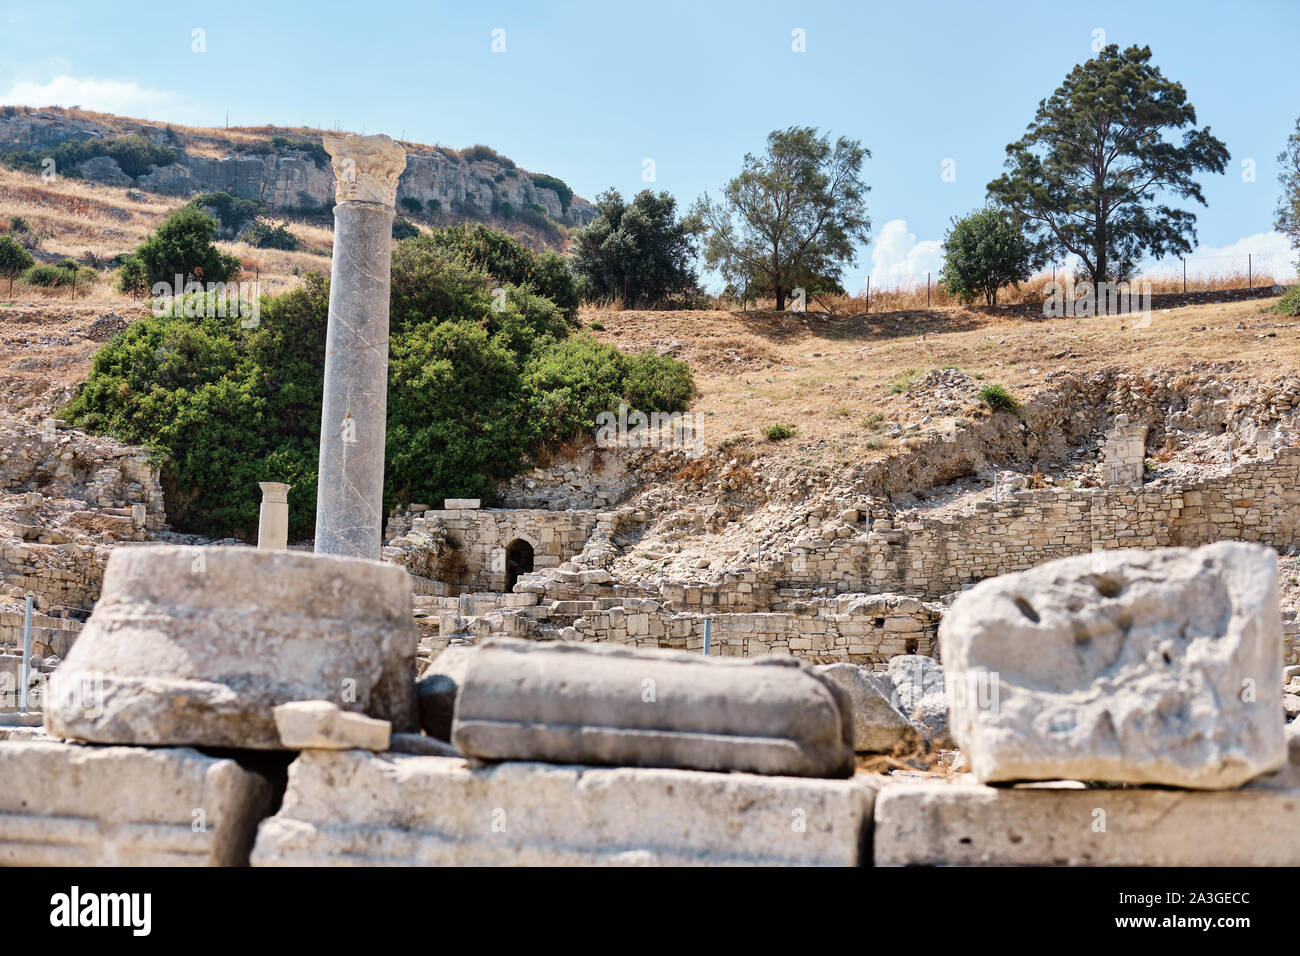 Ancient ruins and columns of the Sanctuary of Apollo Hylates located at the beach of the azure mediterranean sea. Near the Greek town of Kourion. Lima Stock Photo